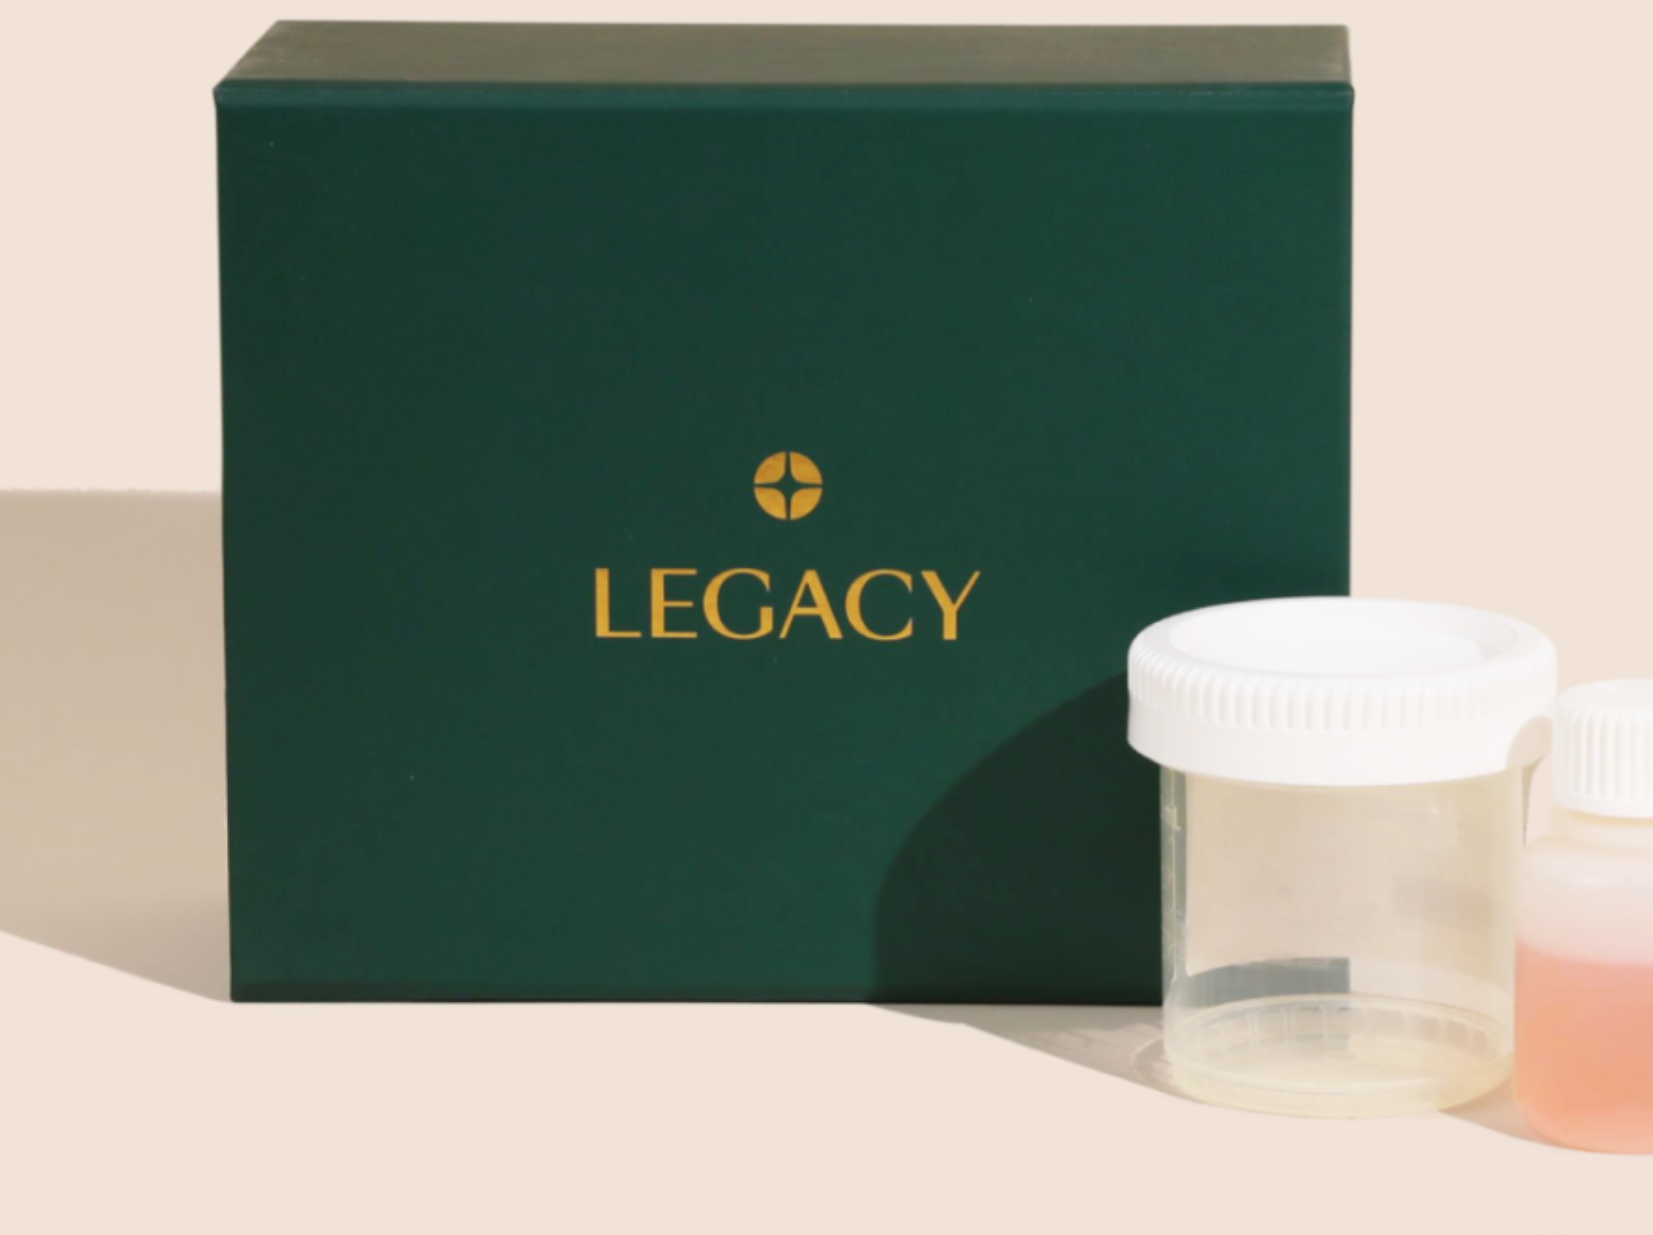 Legacy Sperm Banking At Home Kit, Resources for Testicular Cancer Patients and Survivors